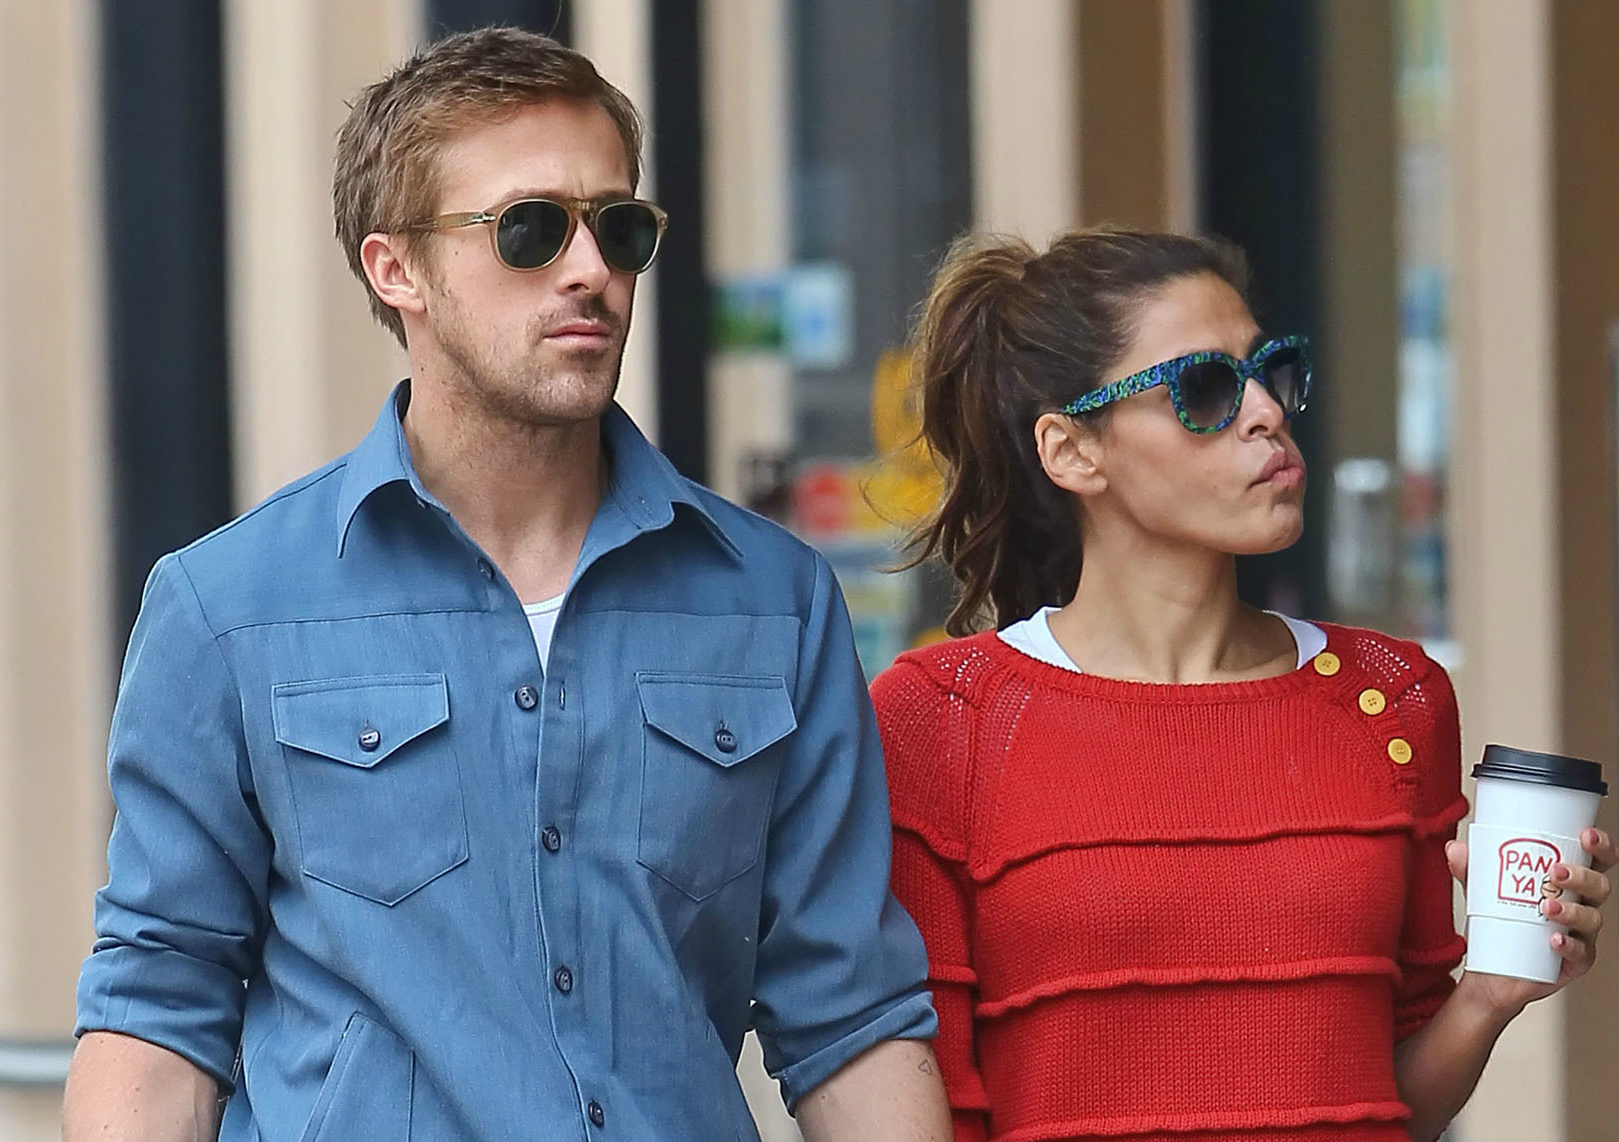 Ryan Gosling and Eva Mendes Have Reportedly Split Up | StyleCaster